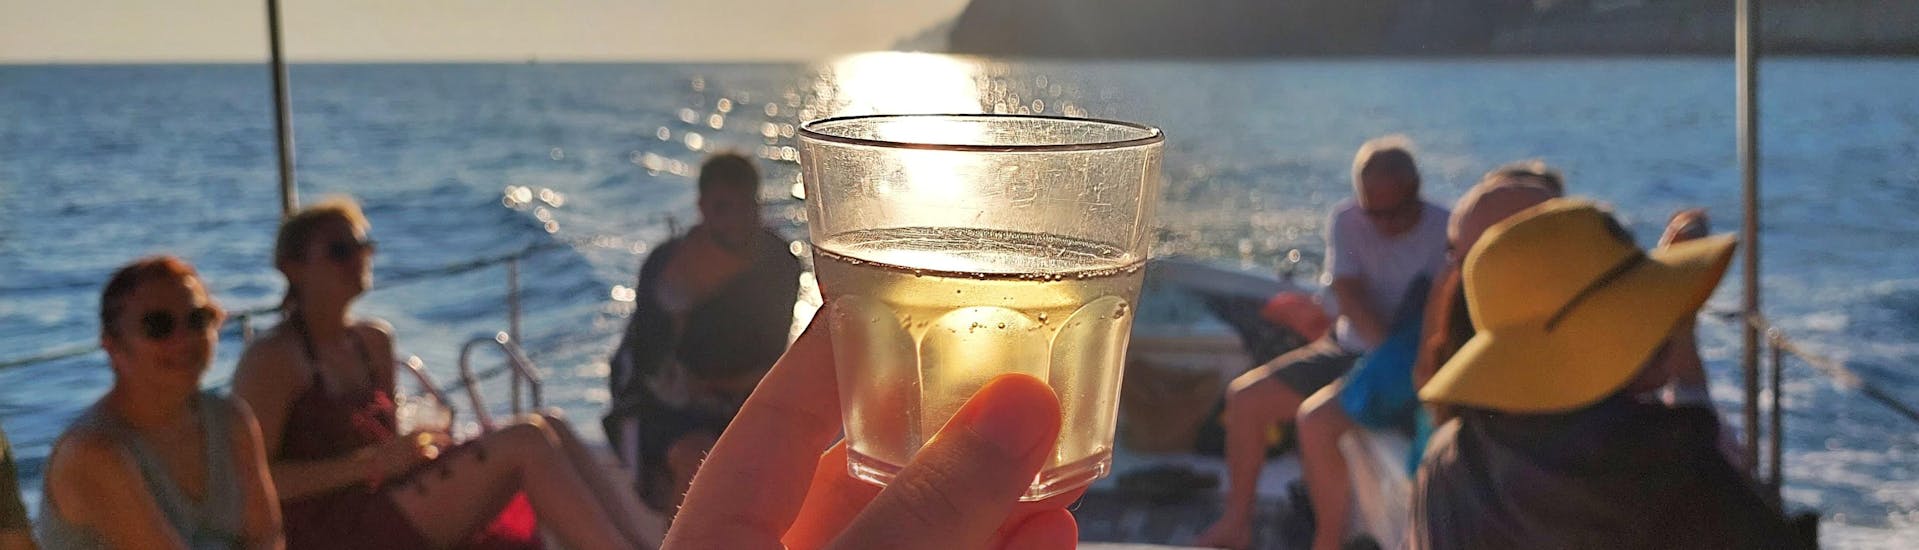 During the Sunset boat trip in Cinque Terre from Monterosso and Levanto with Ale 5 Terre participants drink prosecco while watching the sunset.